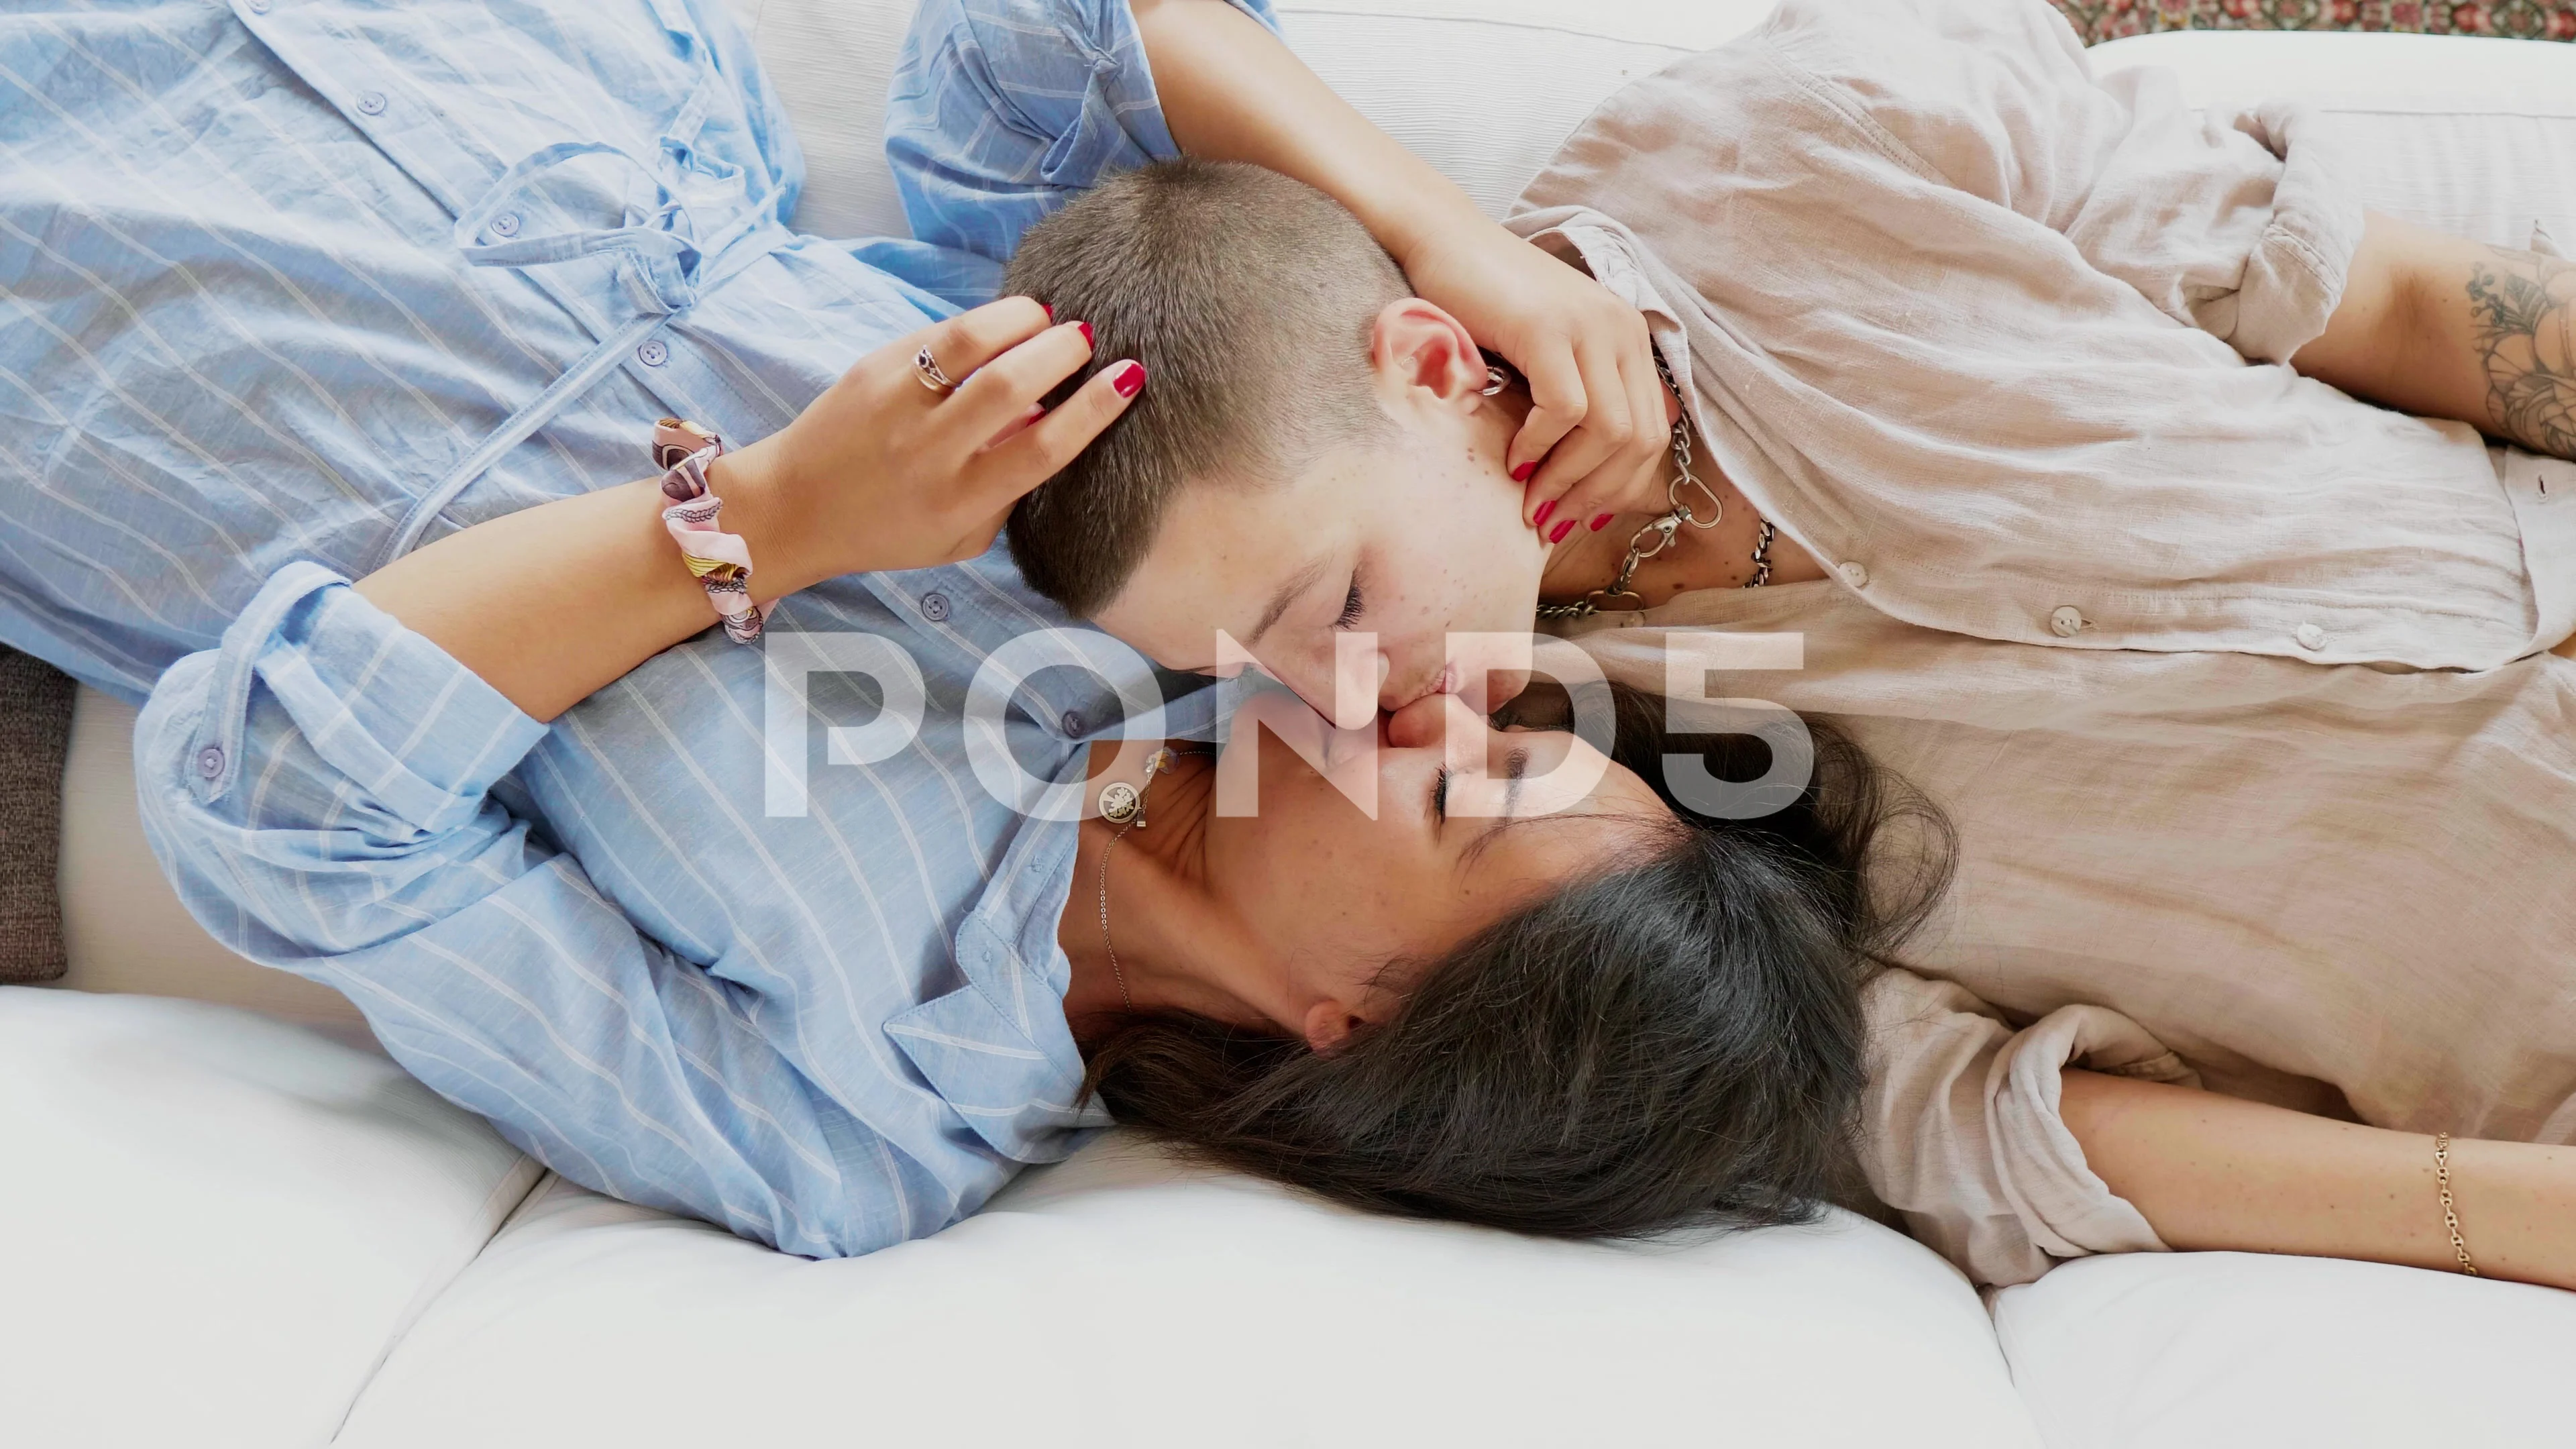 lesbians kissing on couch